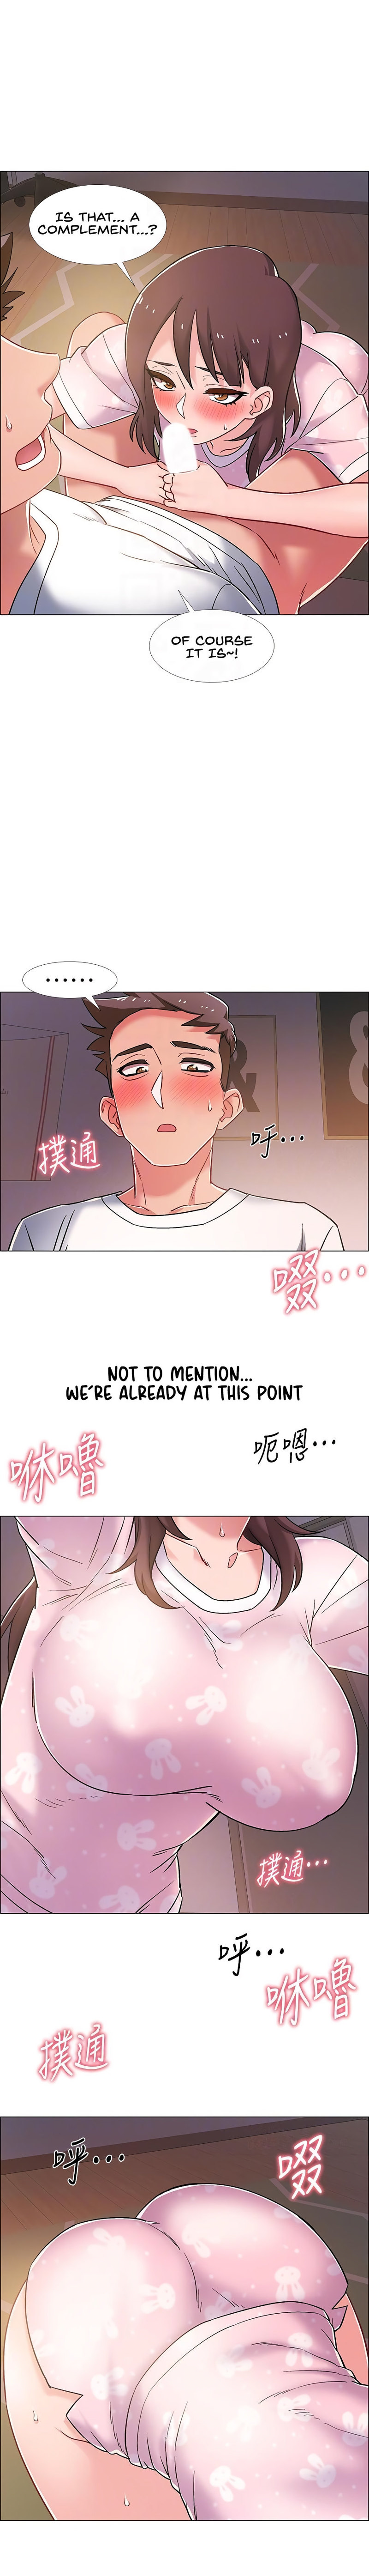 Enlistment Countdown - Chapter 19 Page 10